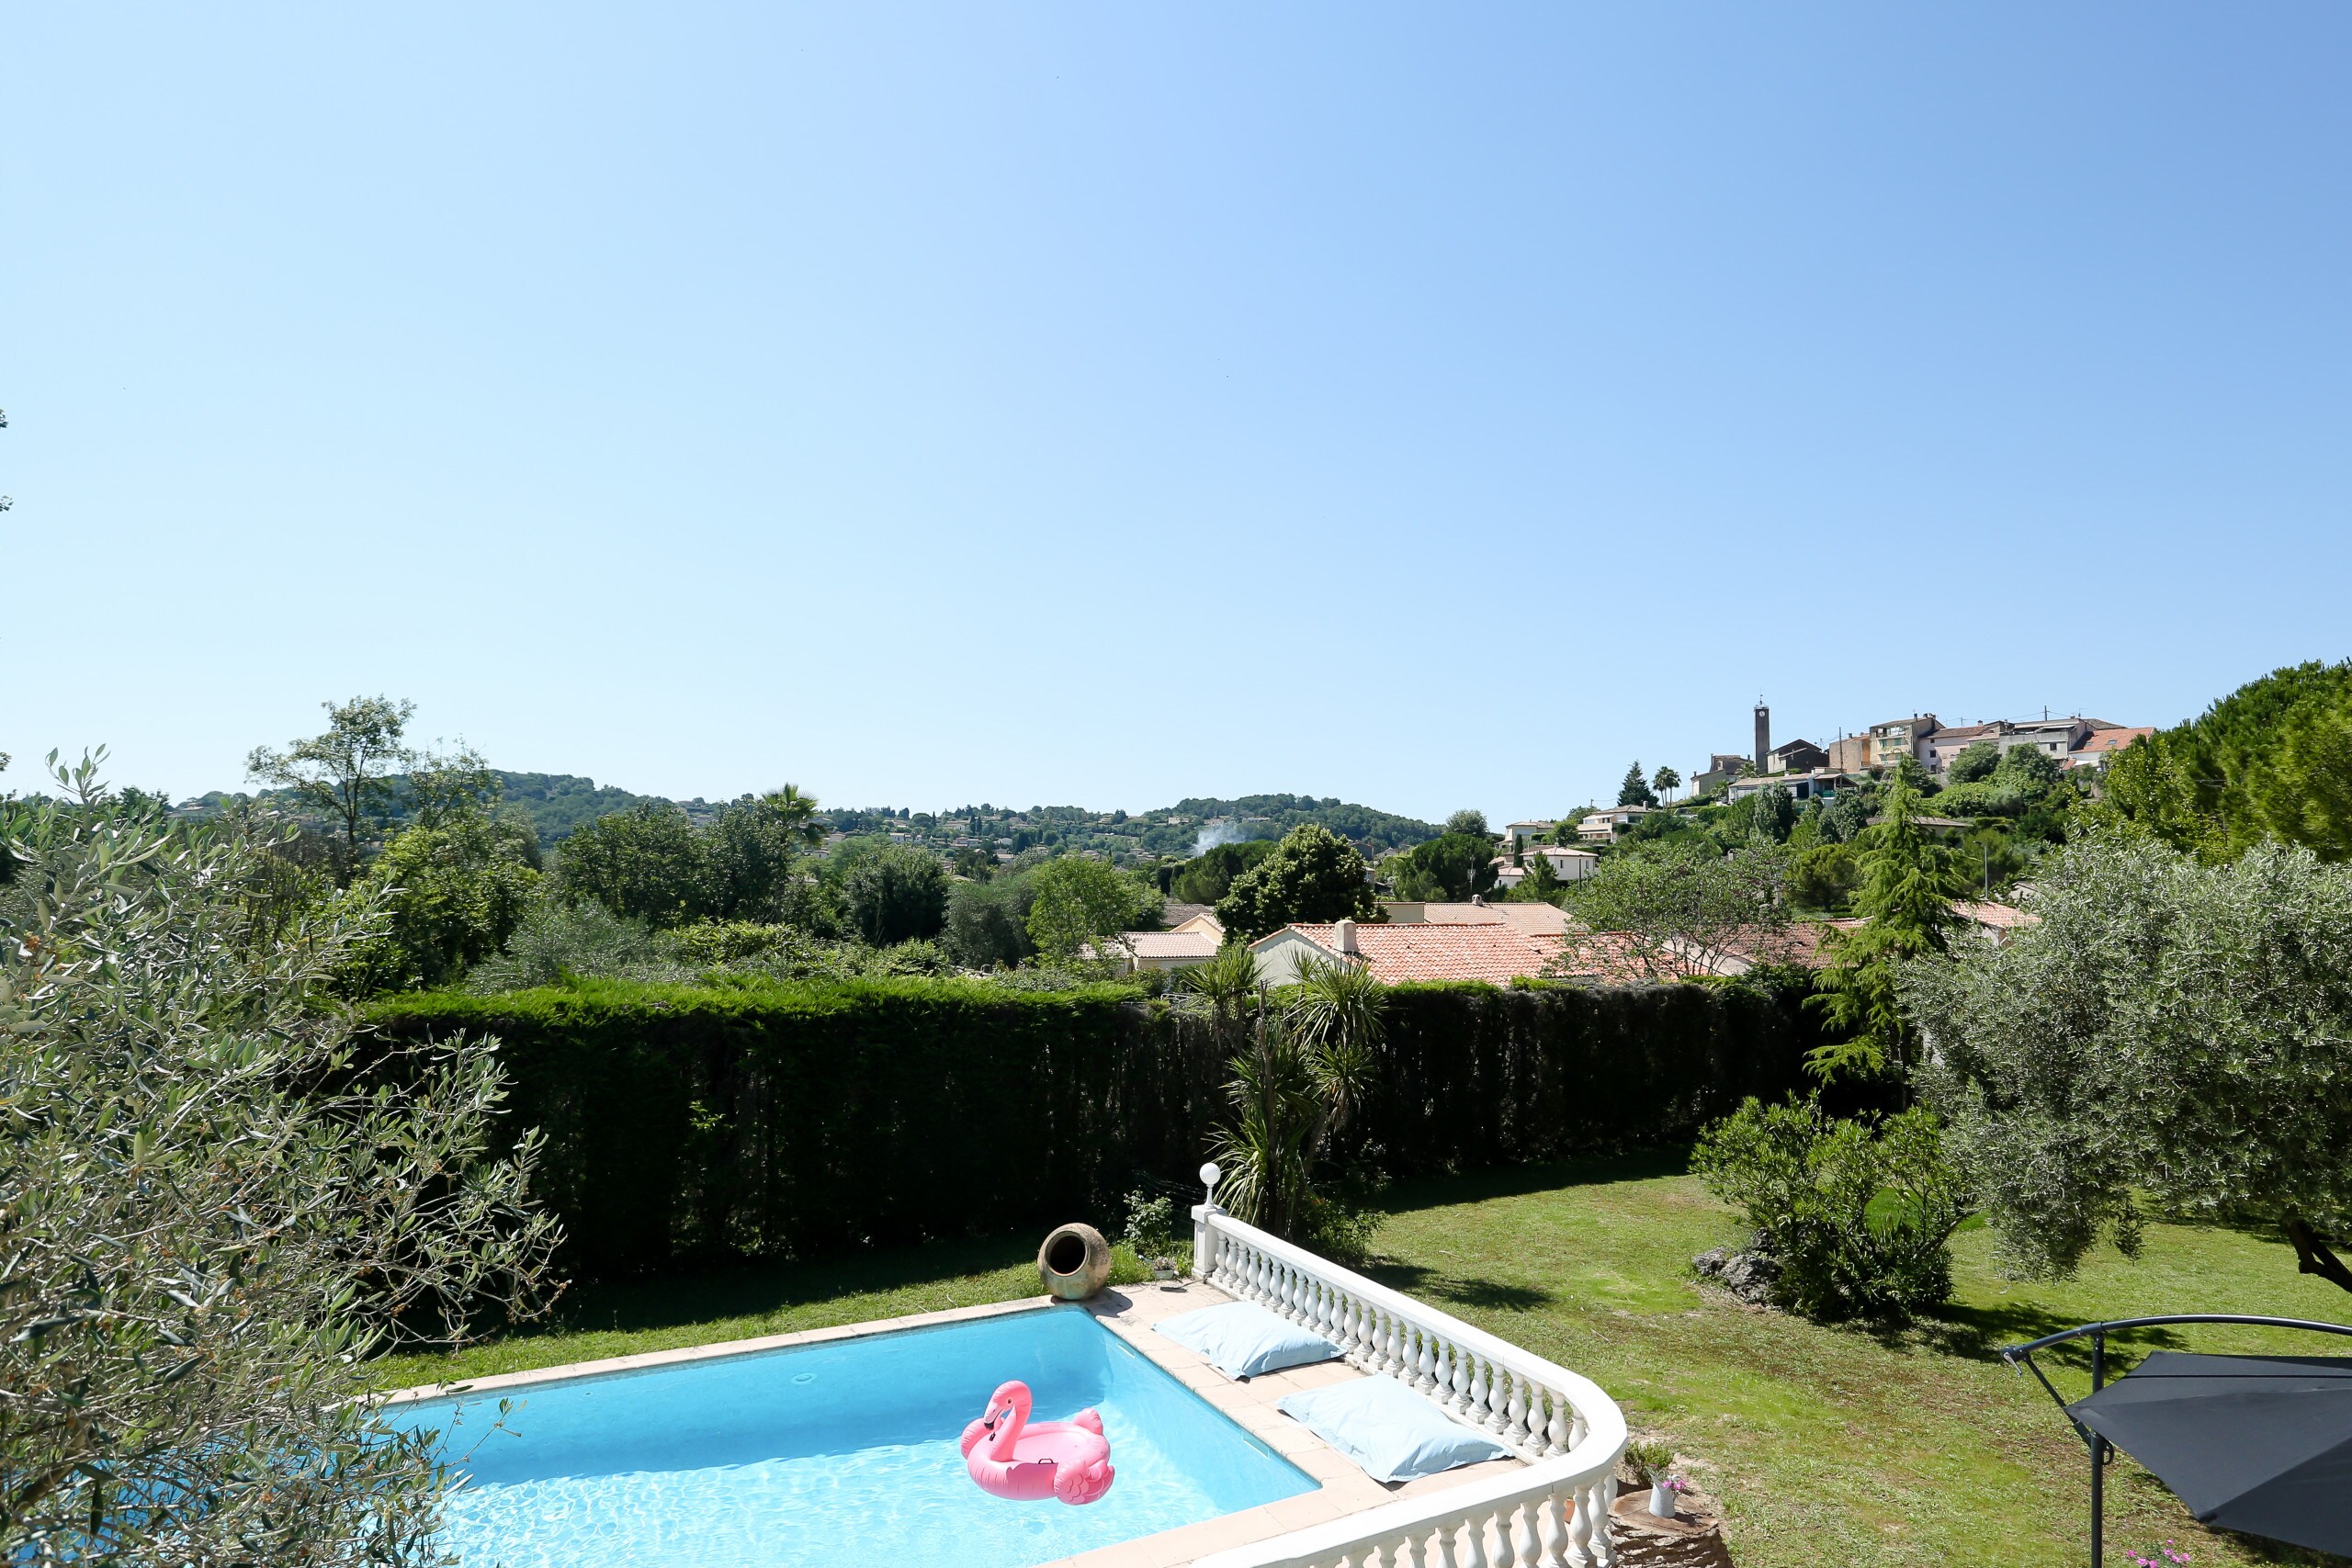 Property Image 2 - Wonderful 5-bedroom family villa within walking distance of the village of Plascassier